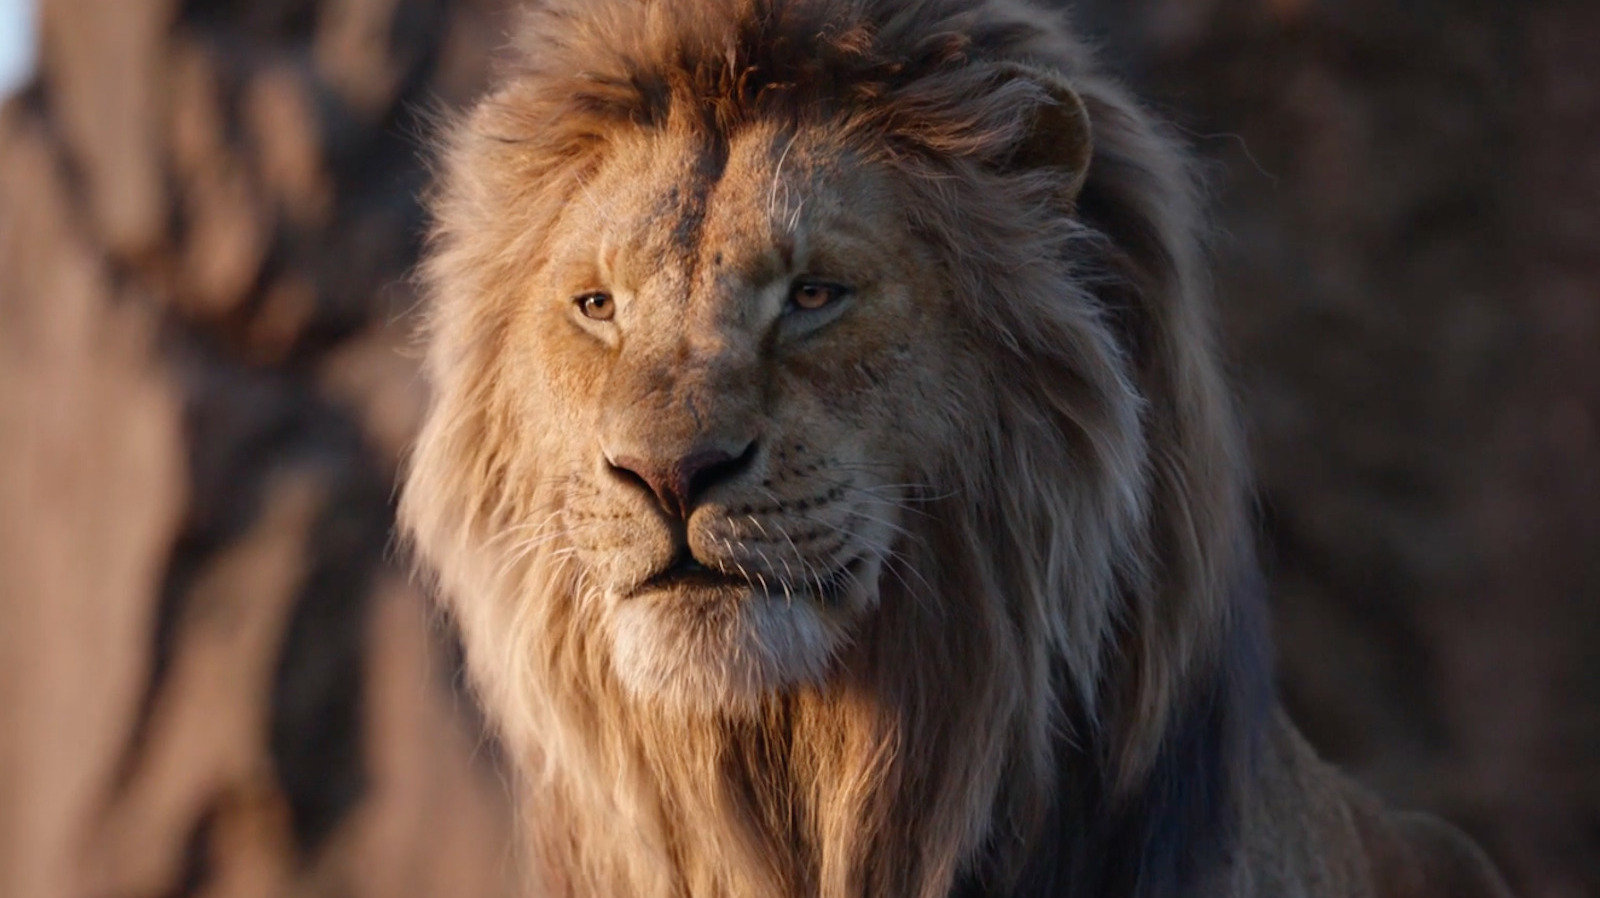 The Lion King Prequel Casts Young Mufasa And Young Scar